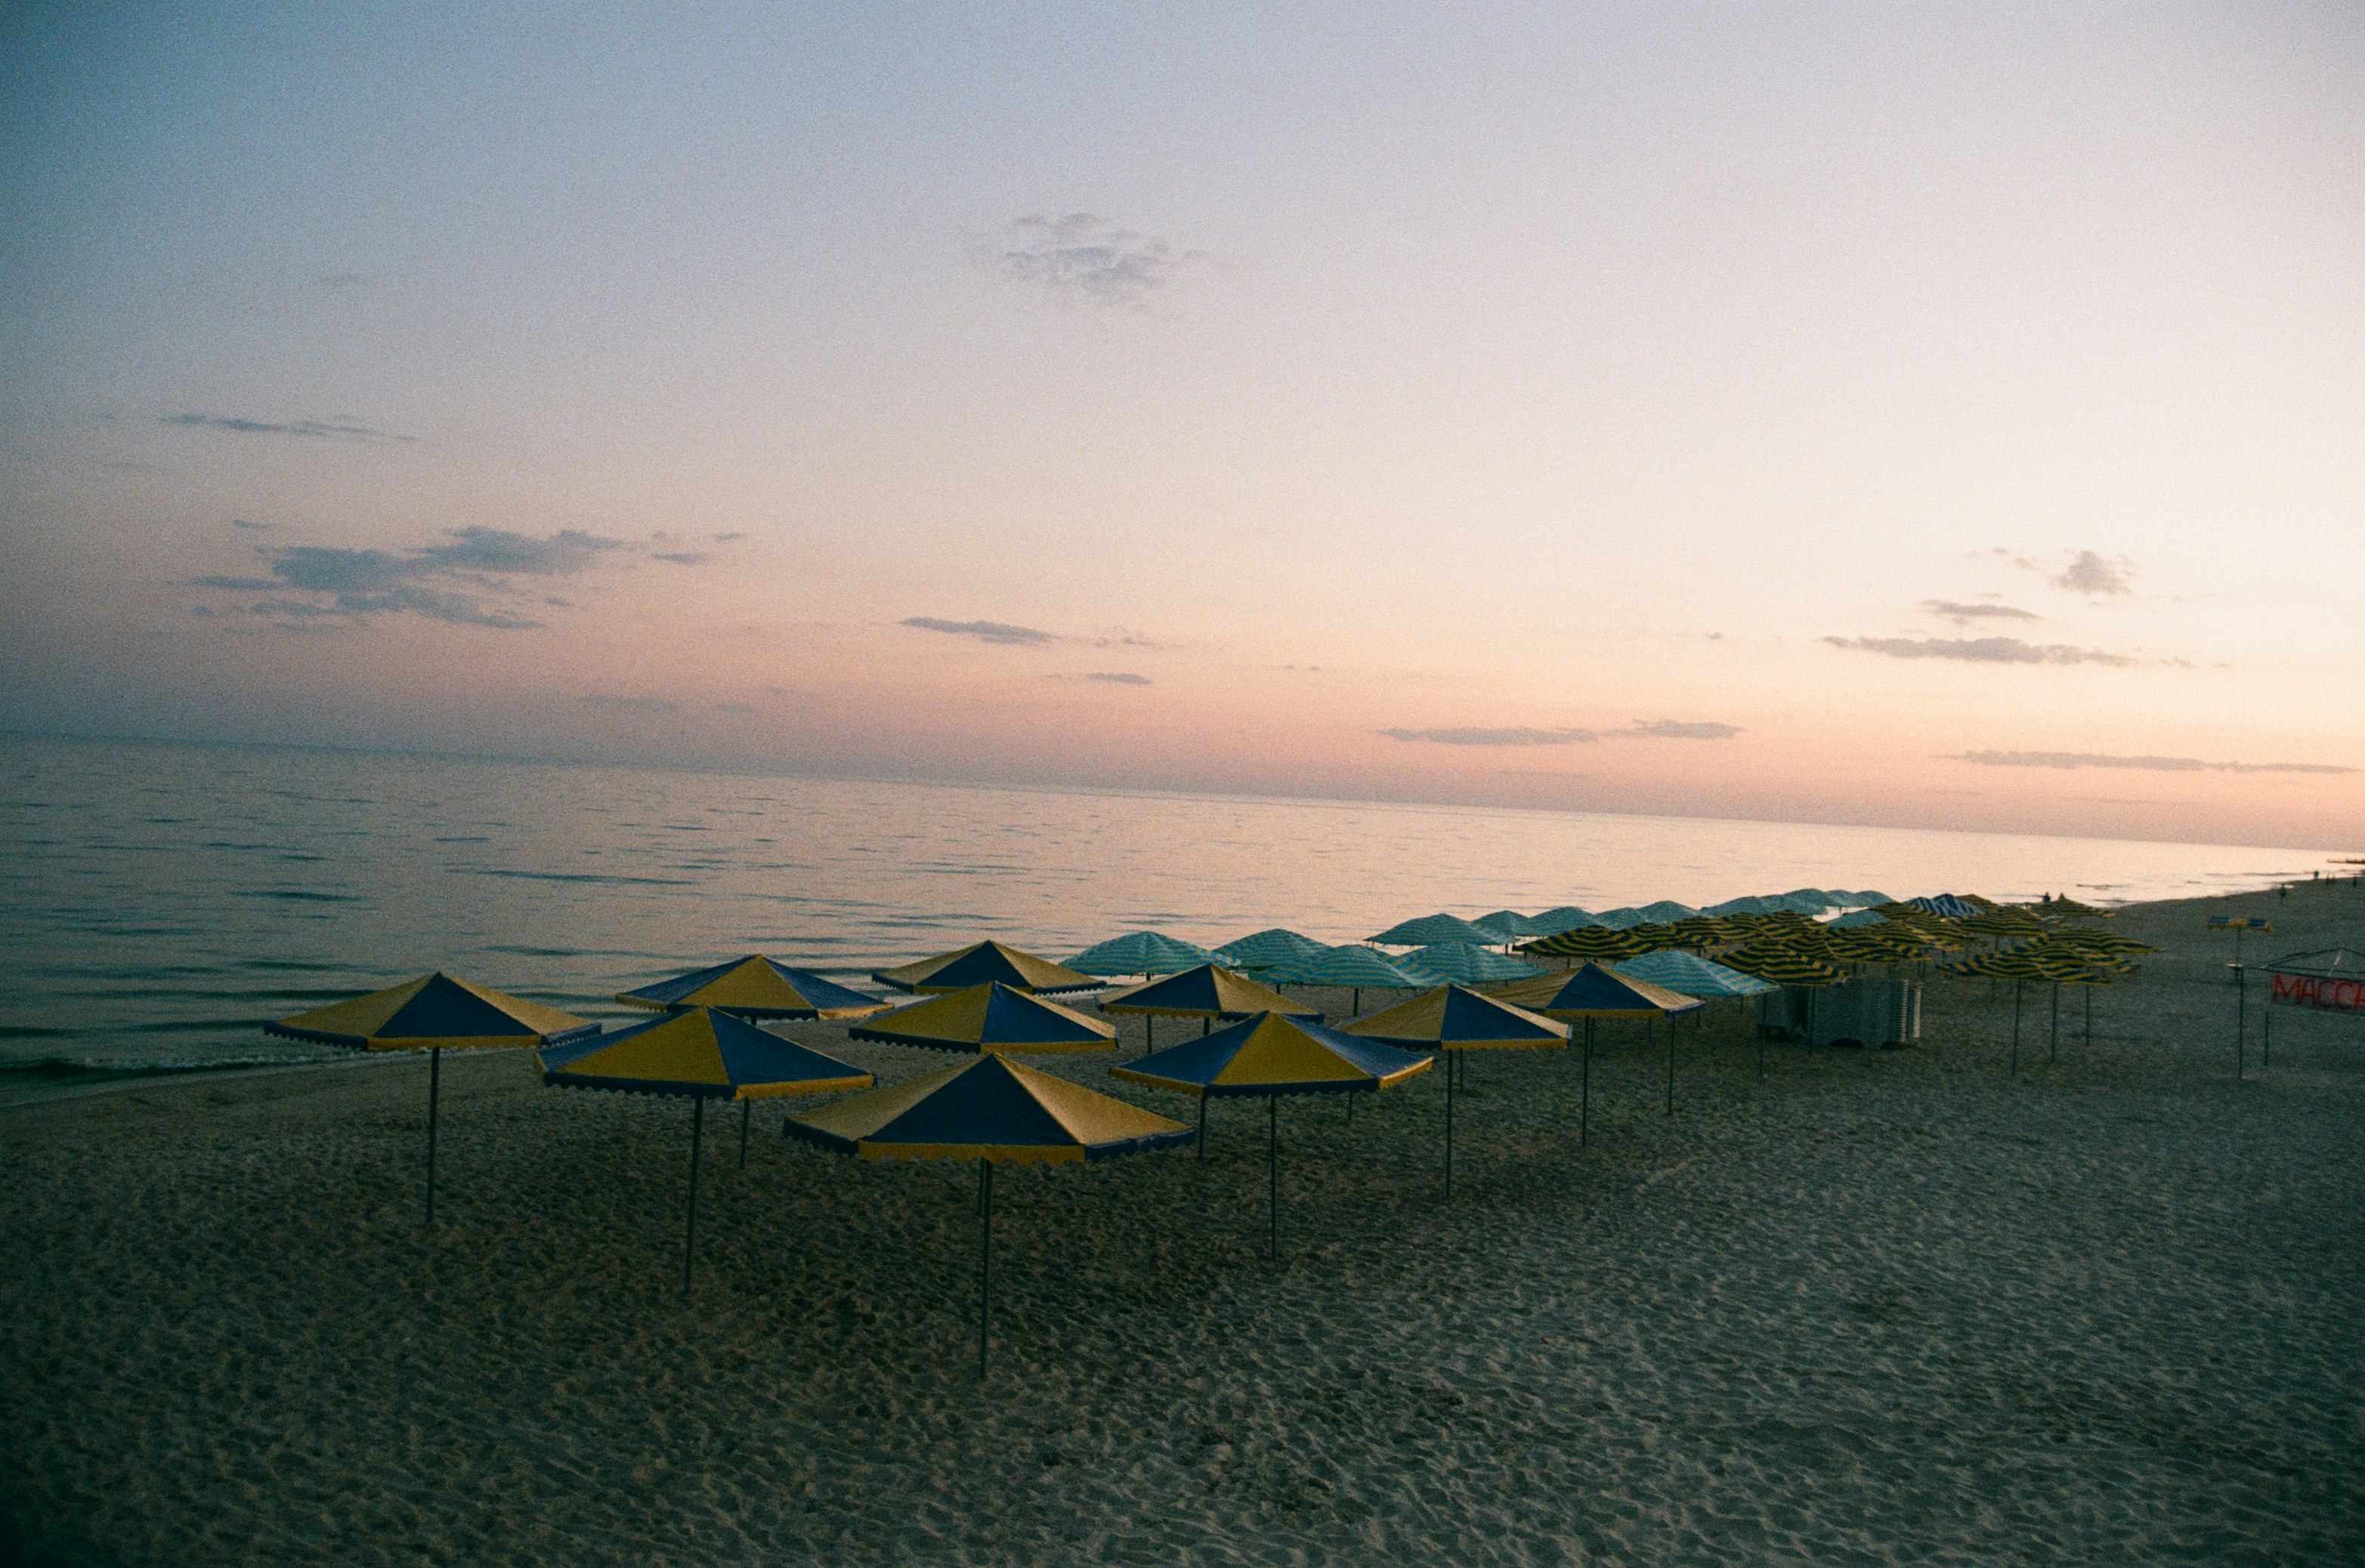 yellow and blue beach umbrellas on beach during sunset